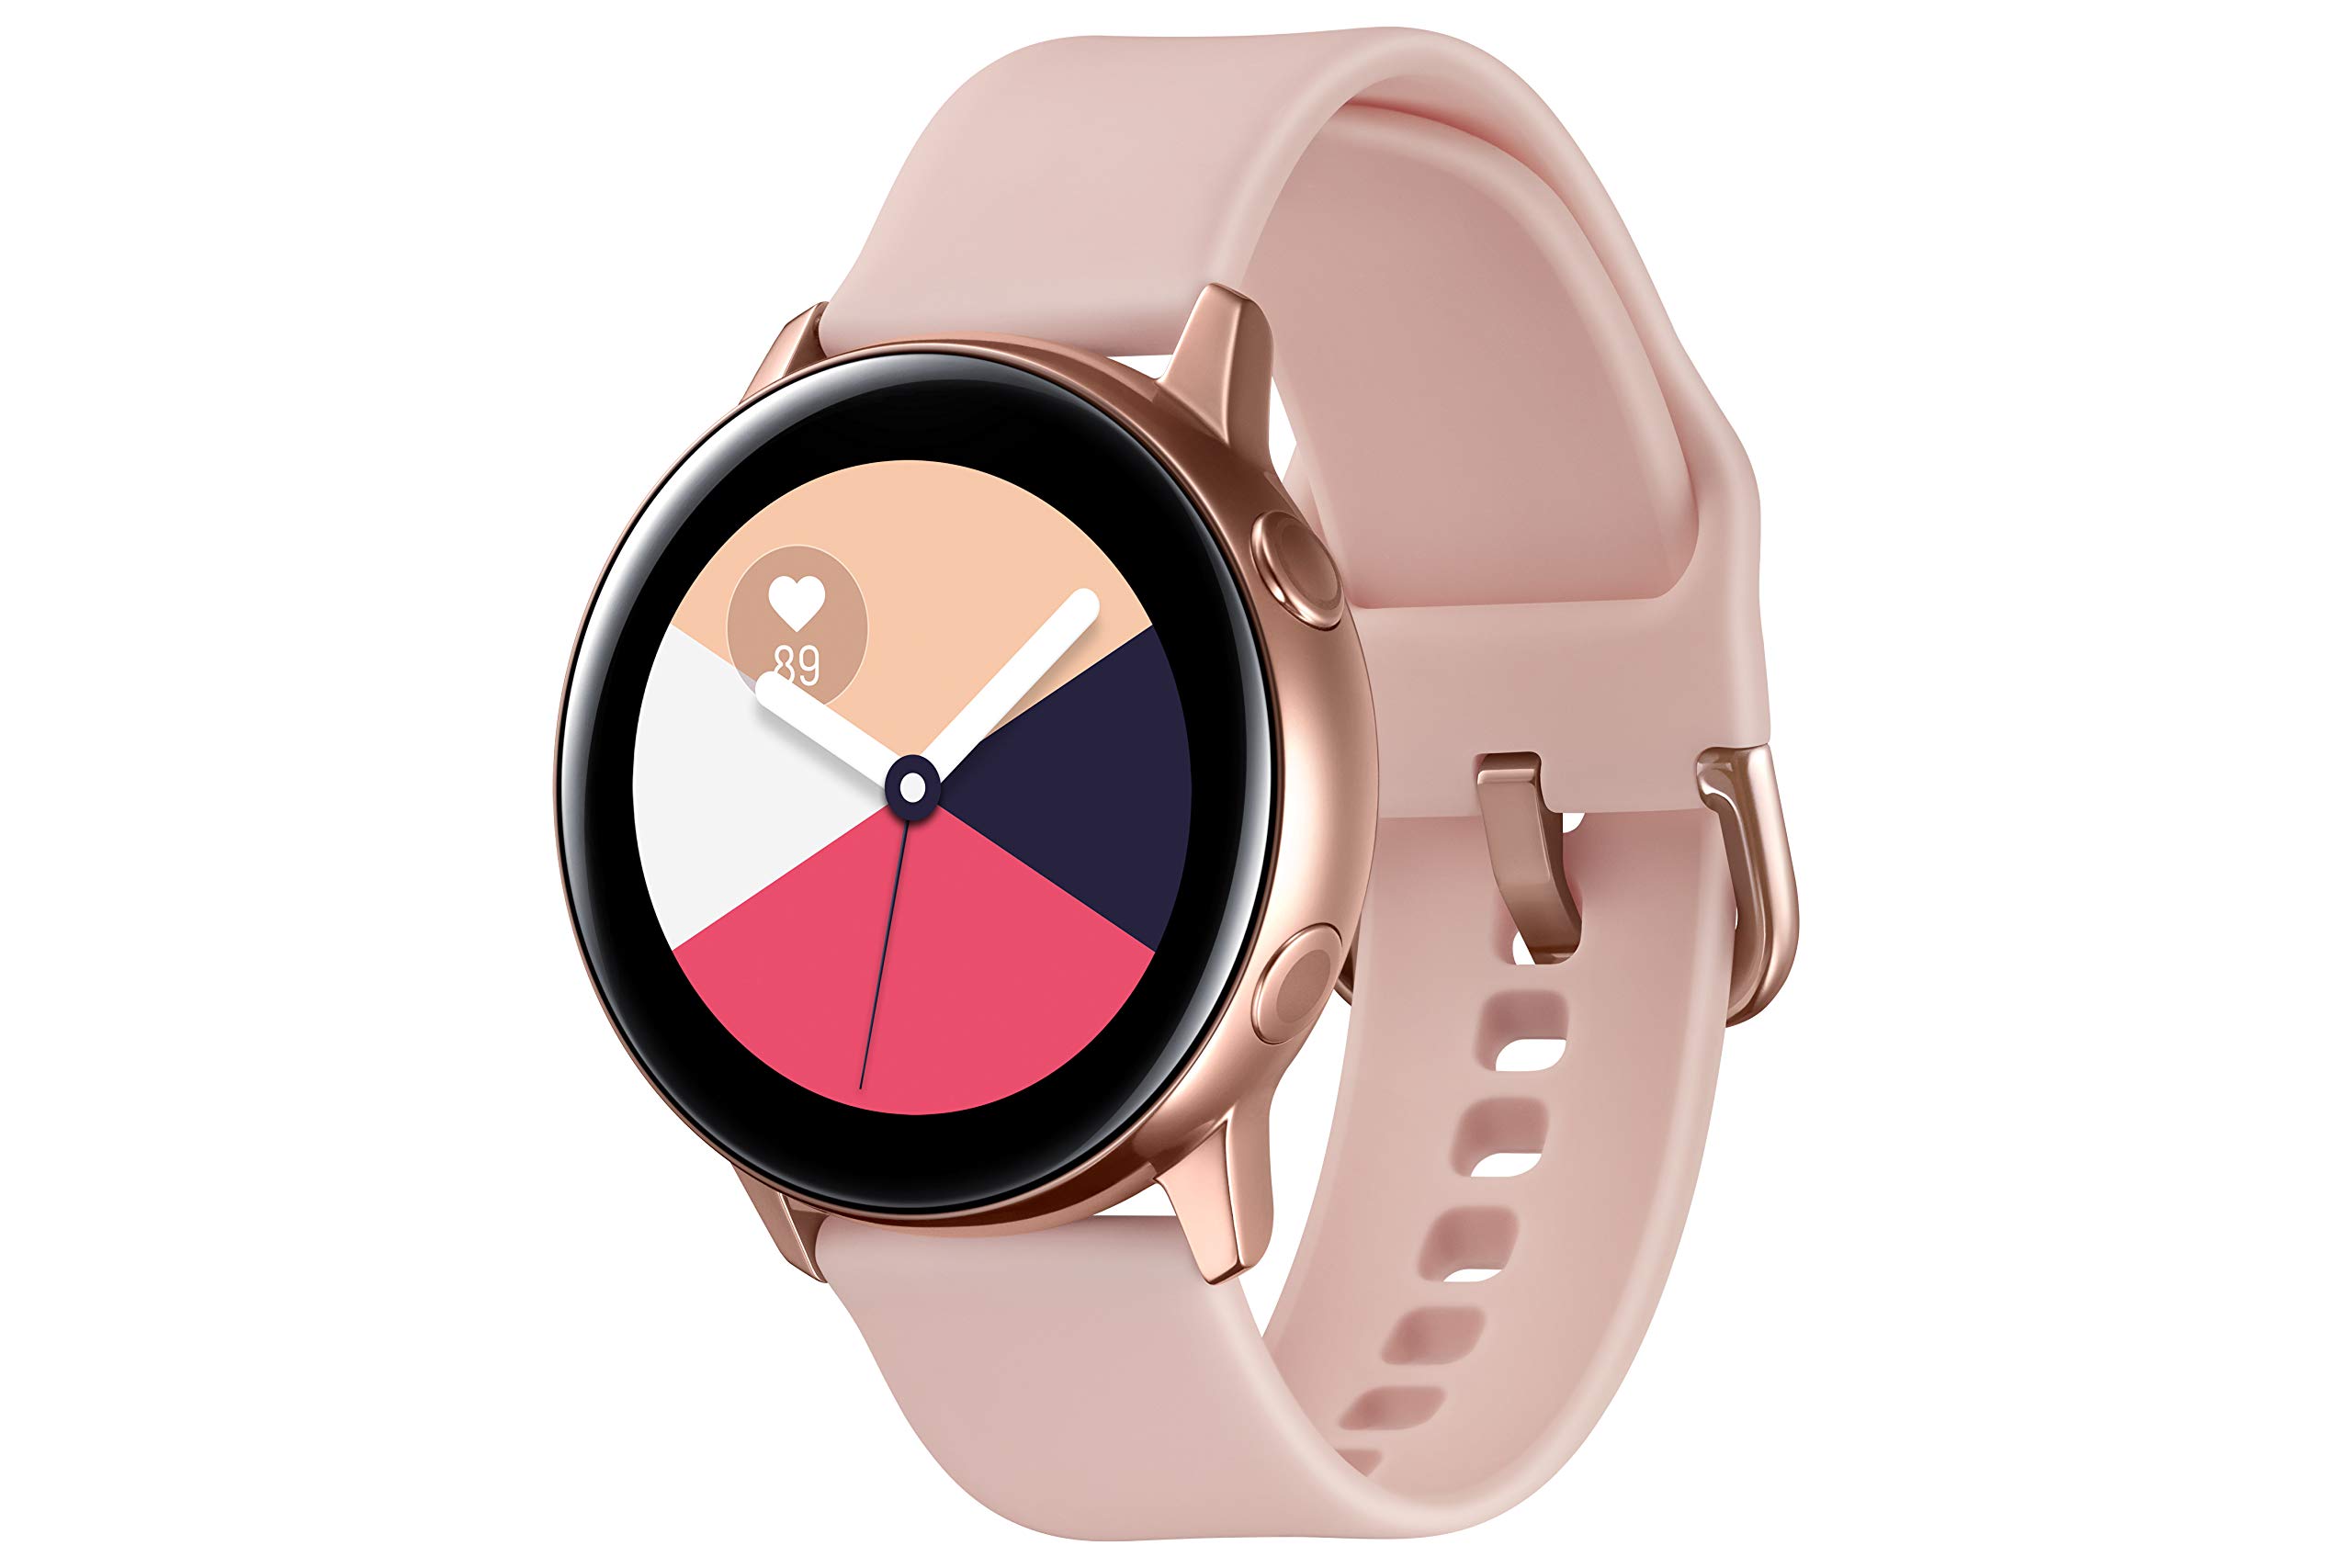 SAMSUNG Galaxy Watch Active (40MM, GPS, Bluetooth) Smart Watch with Fitness Tracking, and Sleep Analysis - Rose Gold (US Version)